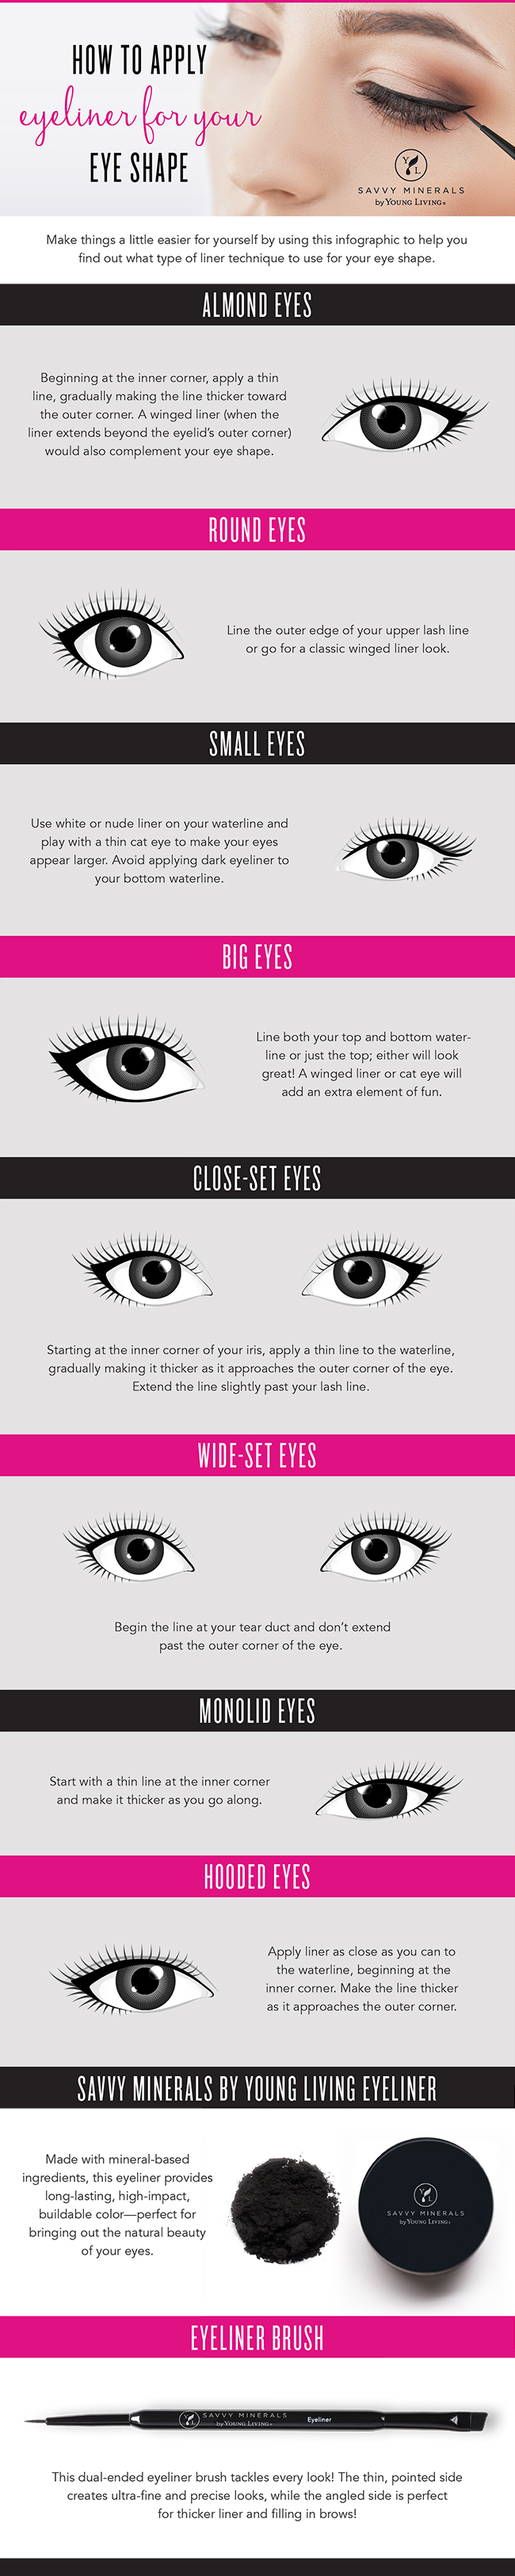 how-to-apply-eyeliner-for-your-eye-shape